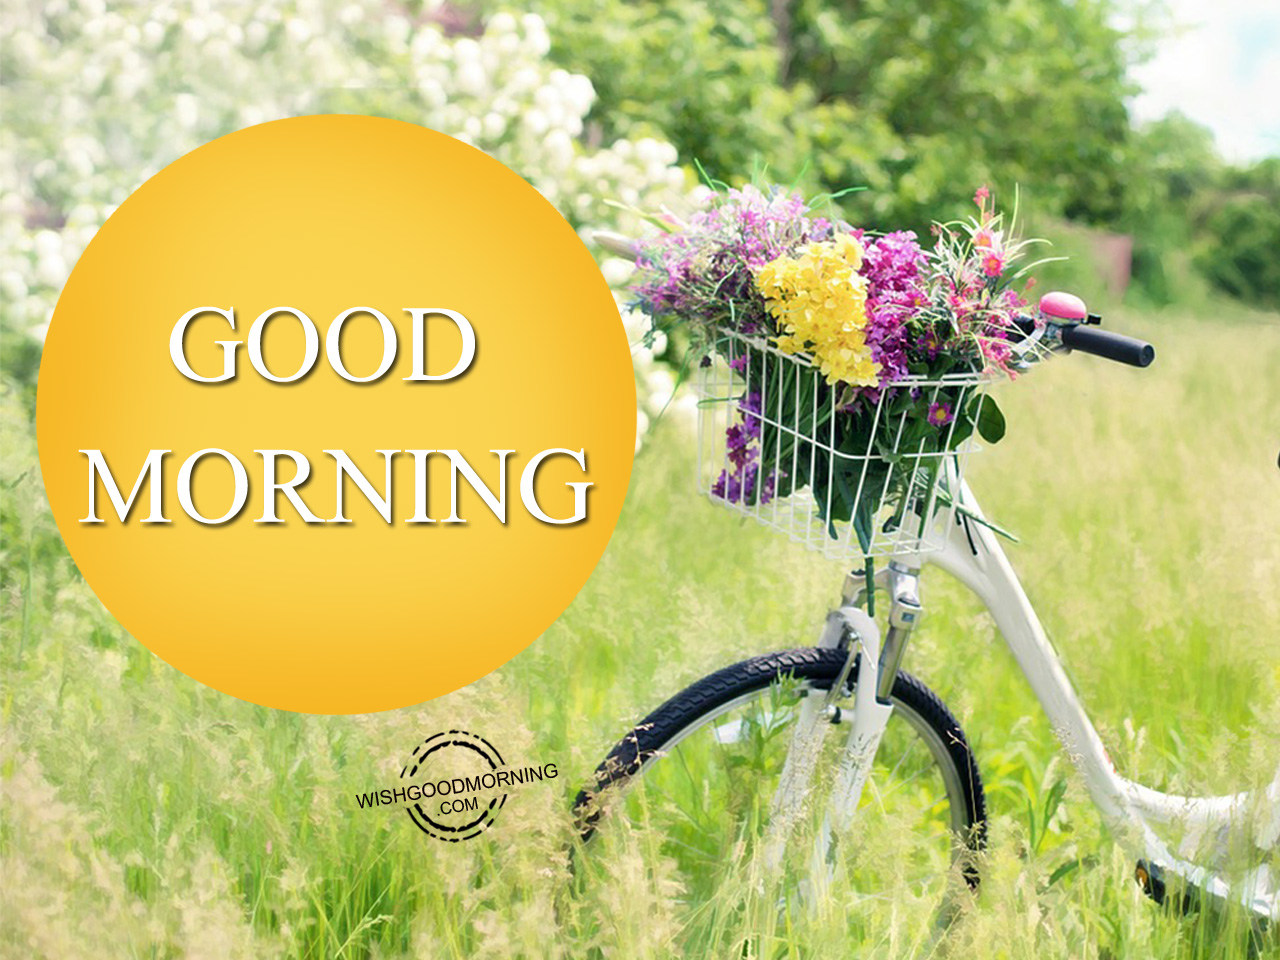 Good Morning Pic - Good Morning Pictures – WishGoodMorning.com